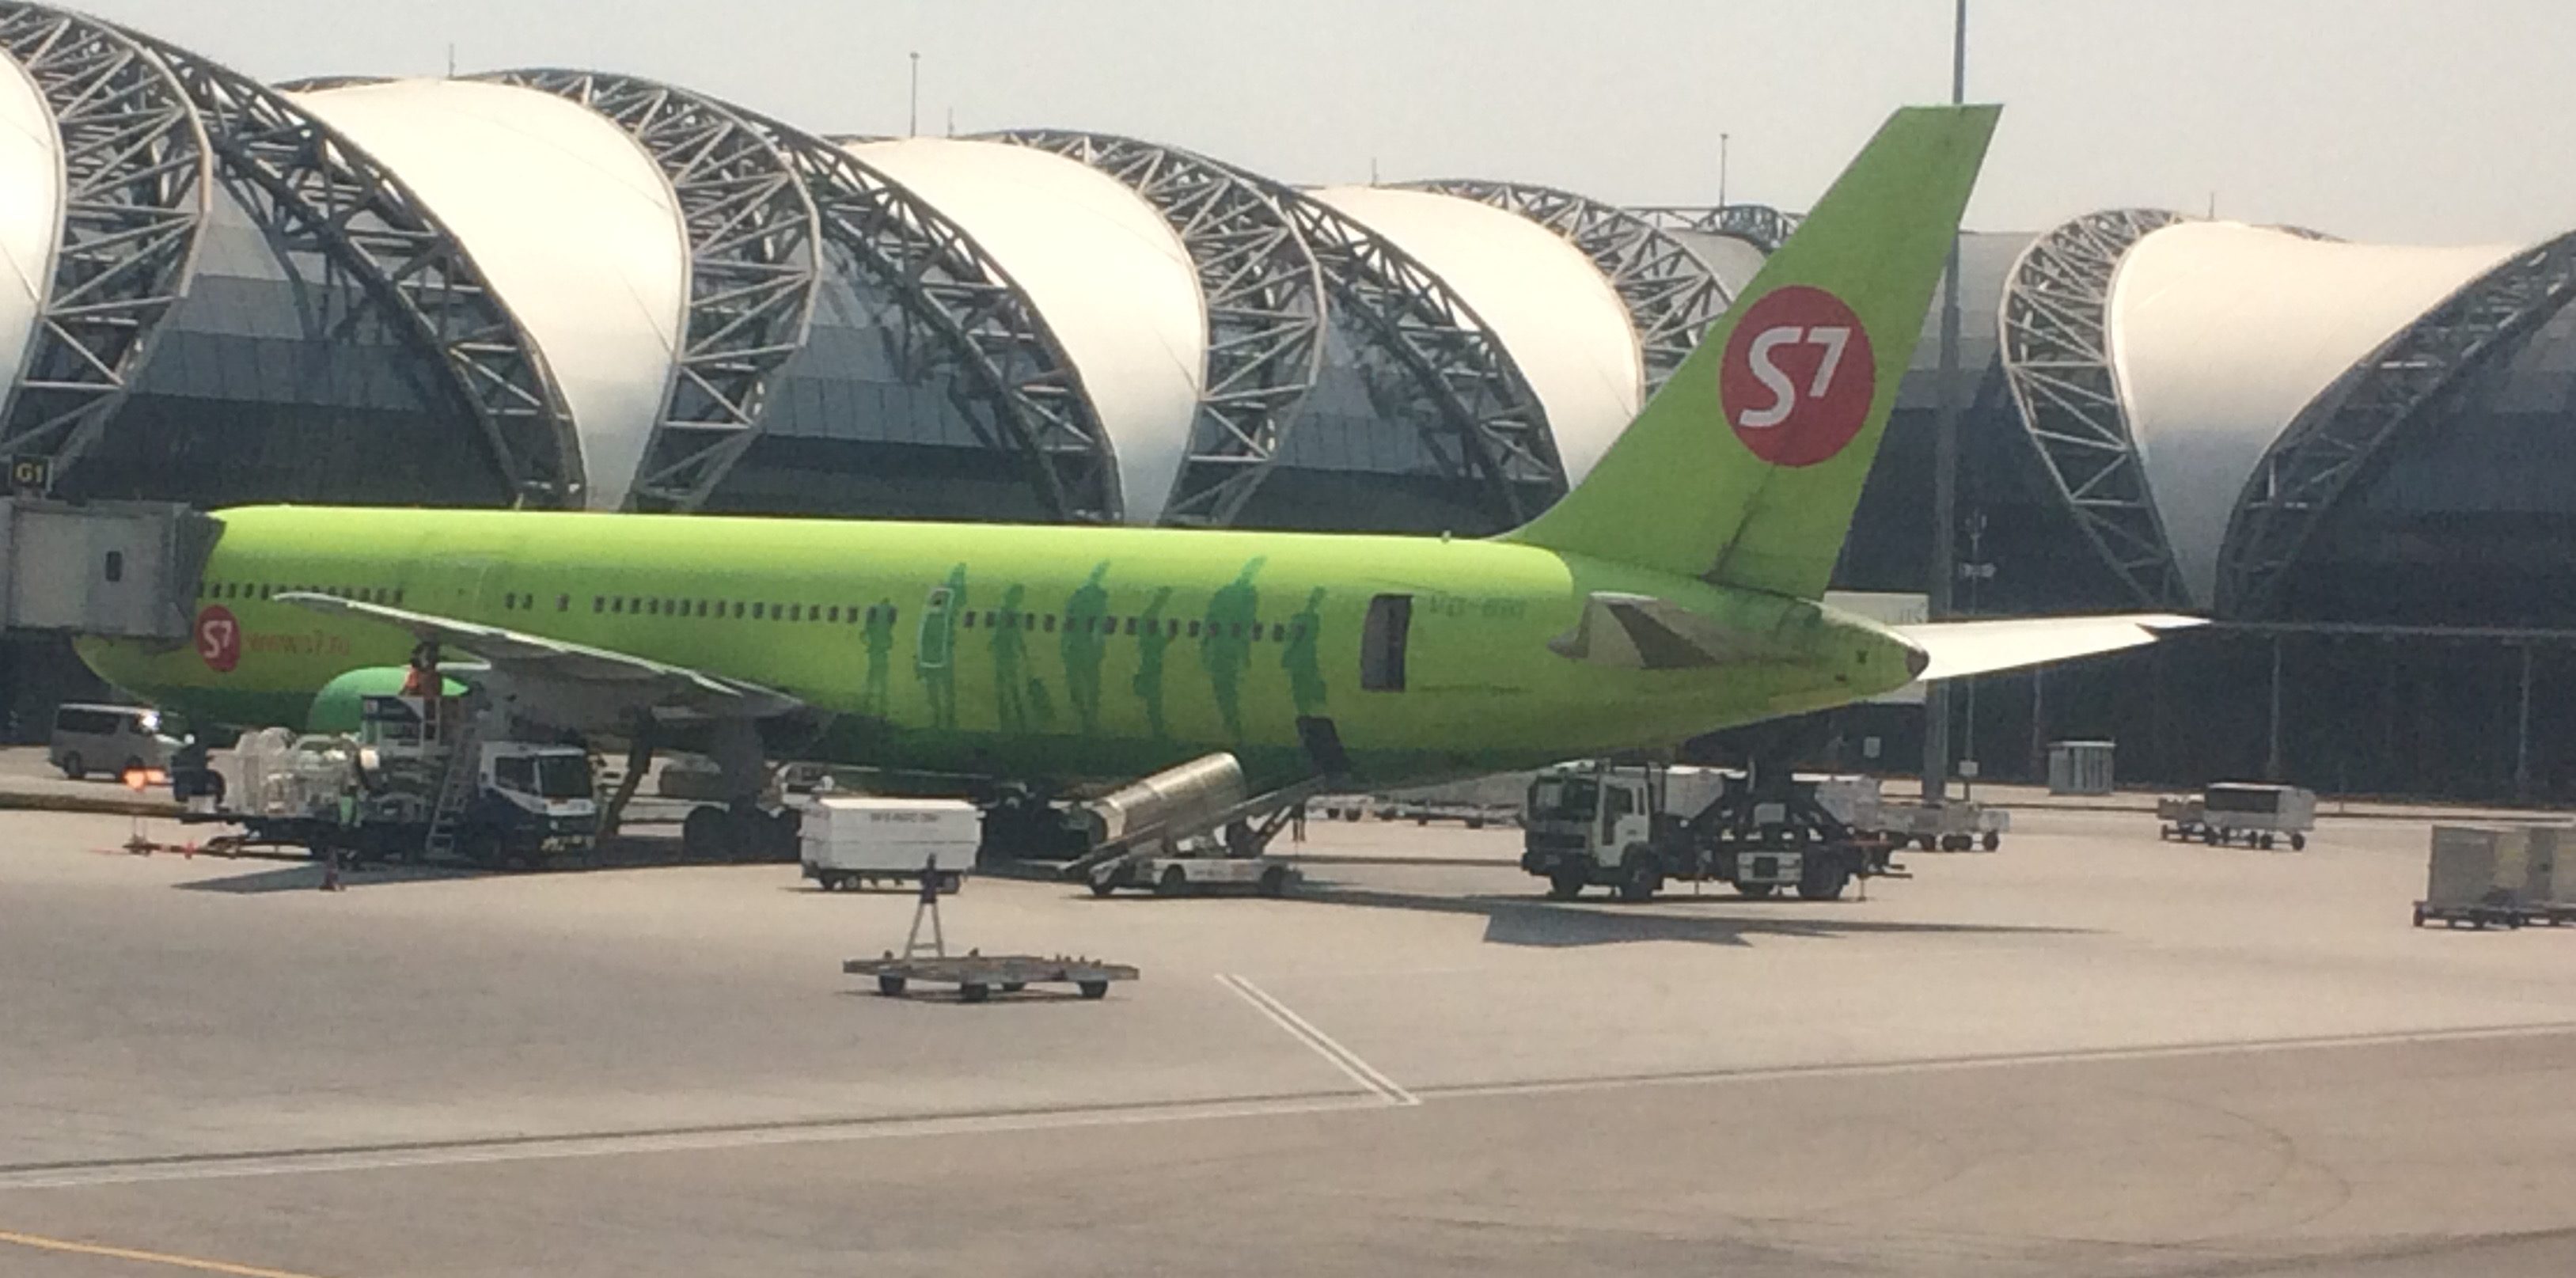 a green airplane at an airport